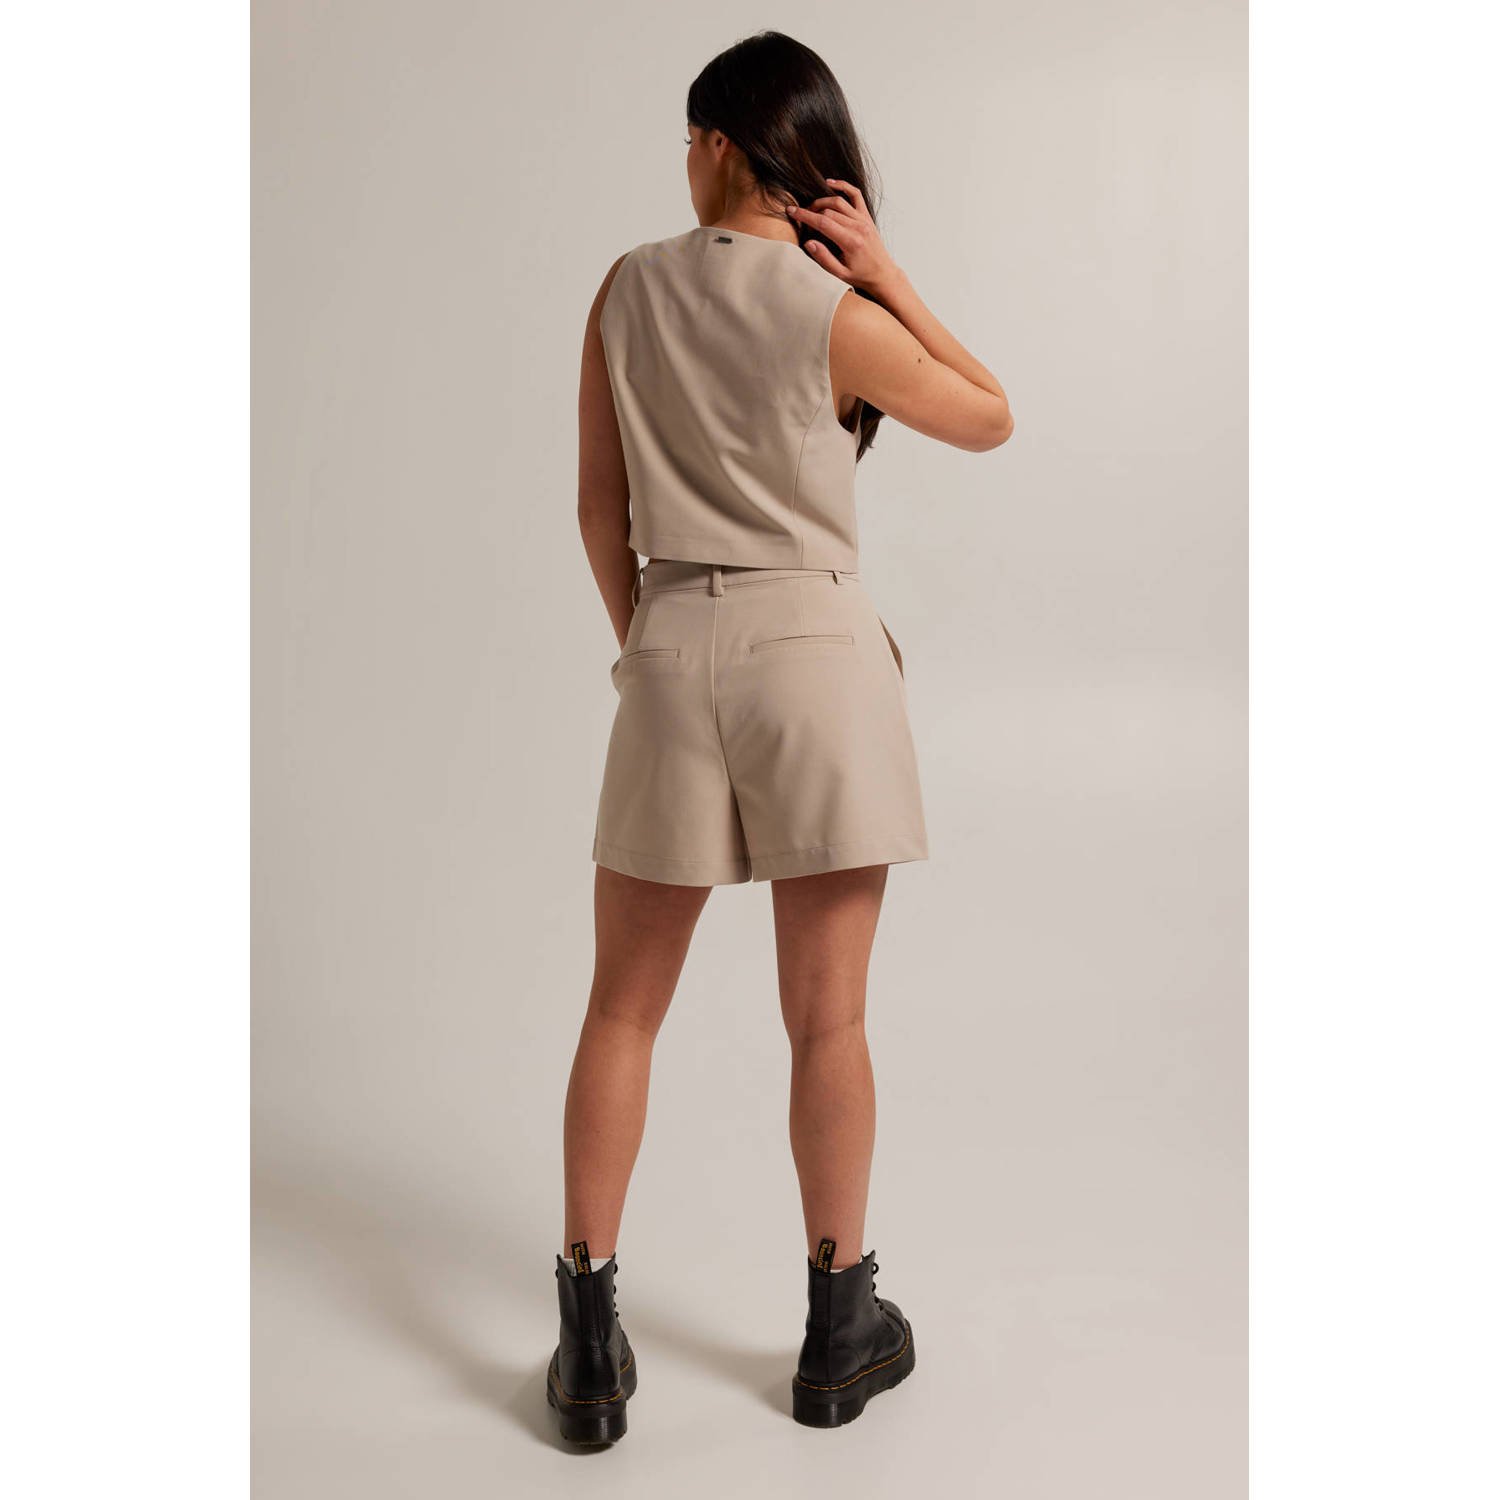 America Today high waist loose fit short beige